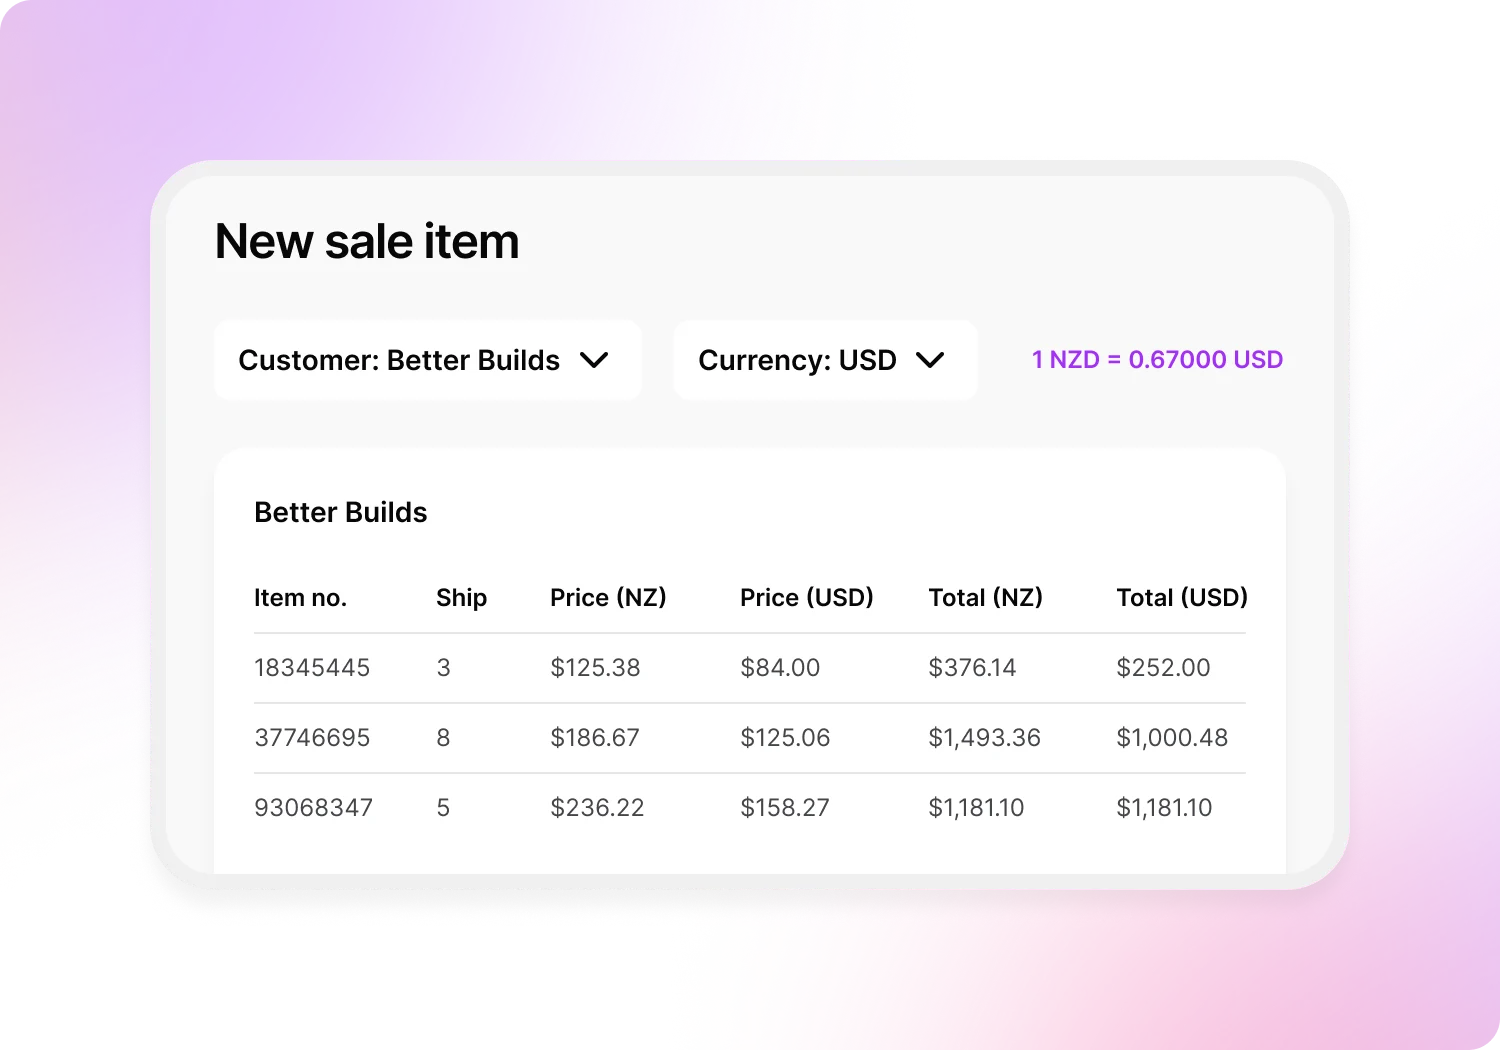 New sale item screen showing item number, shipment, item price and total costs